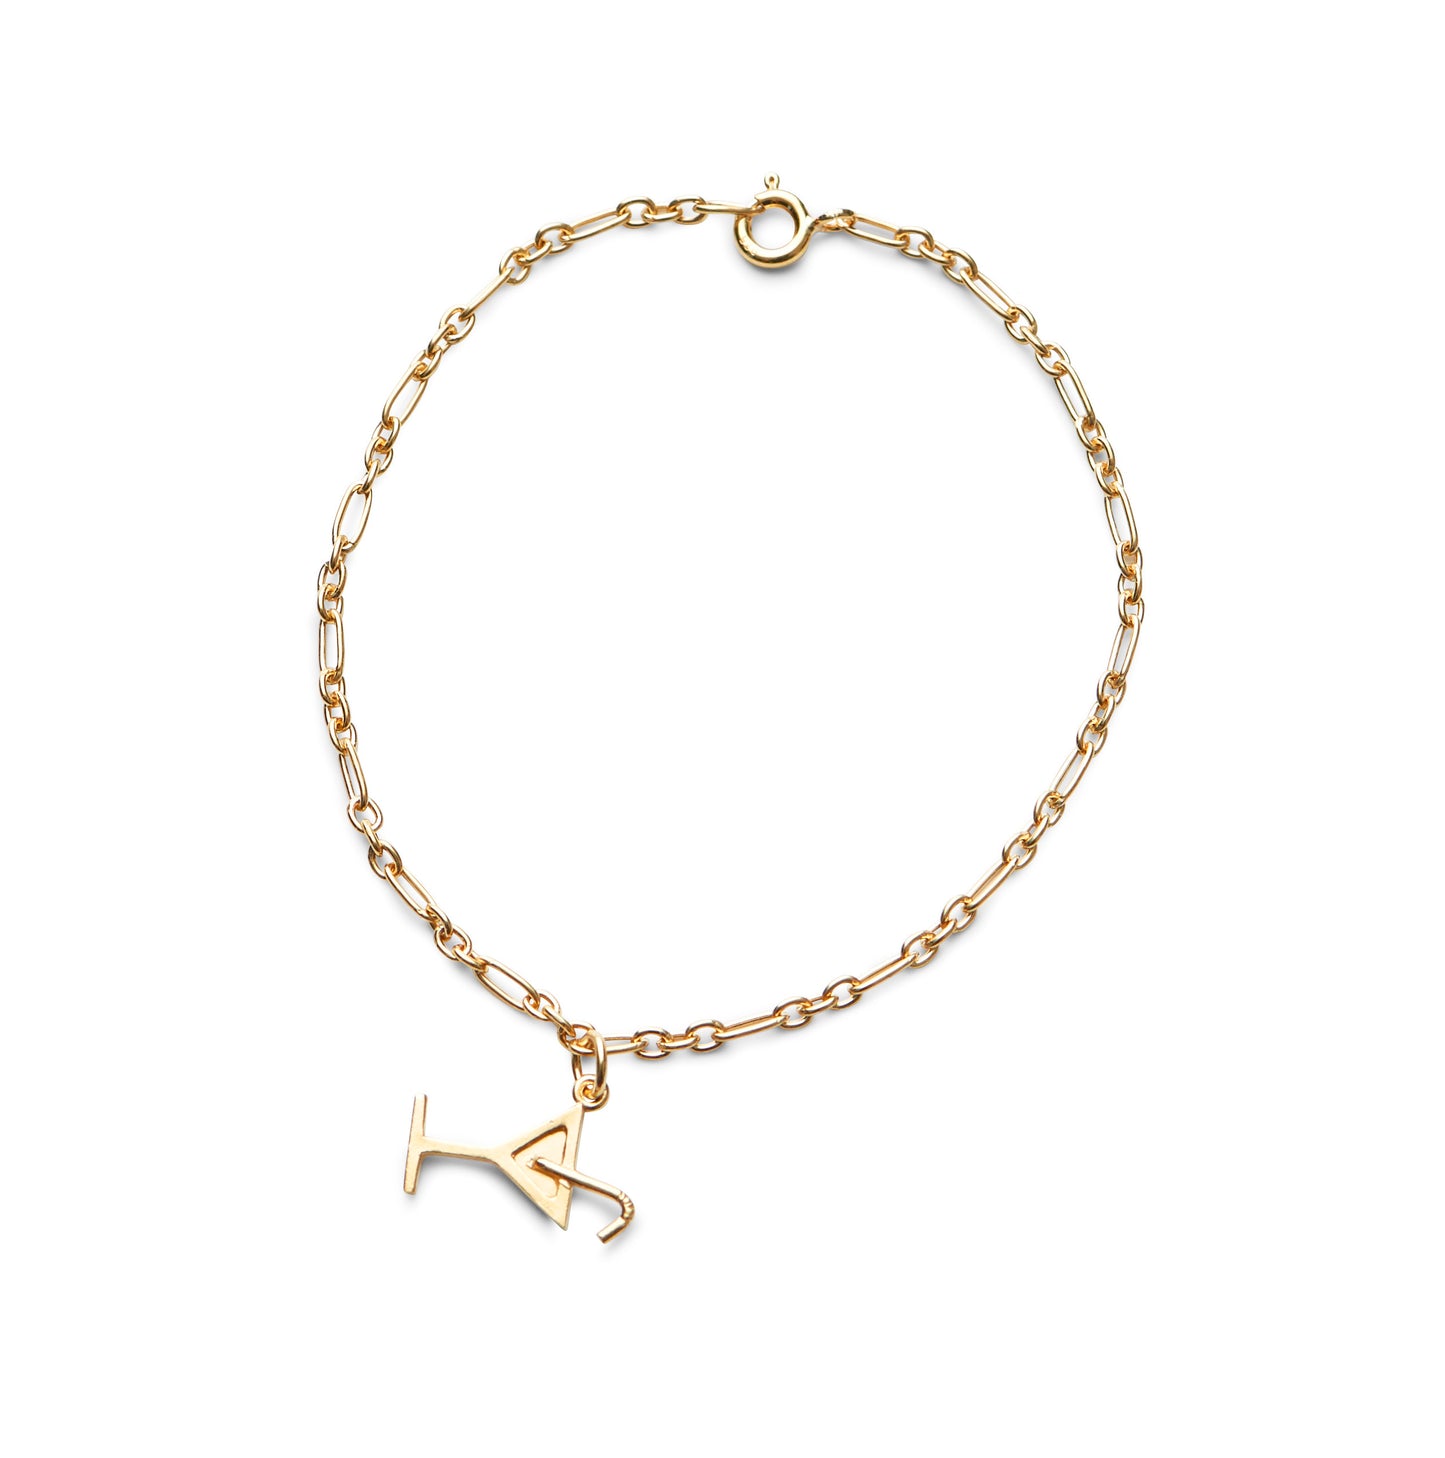 Cocktail Bracelet -  925 Silver or Gold Plated